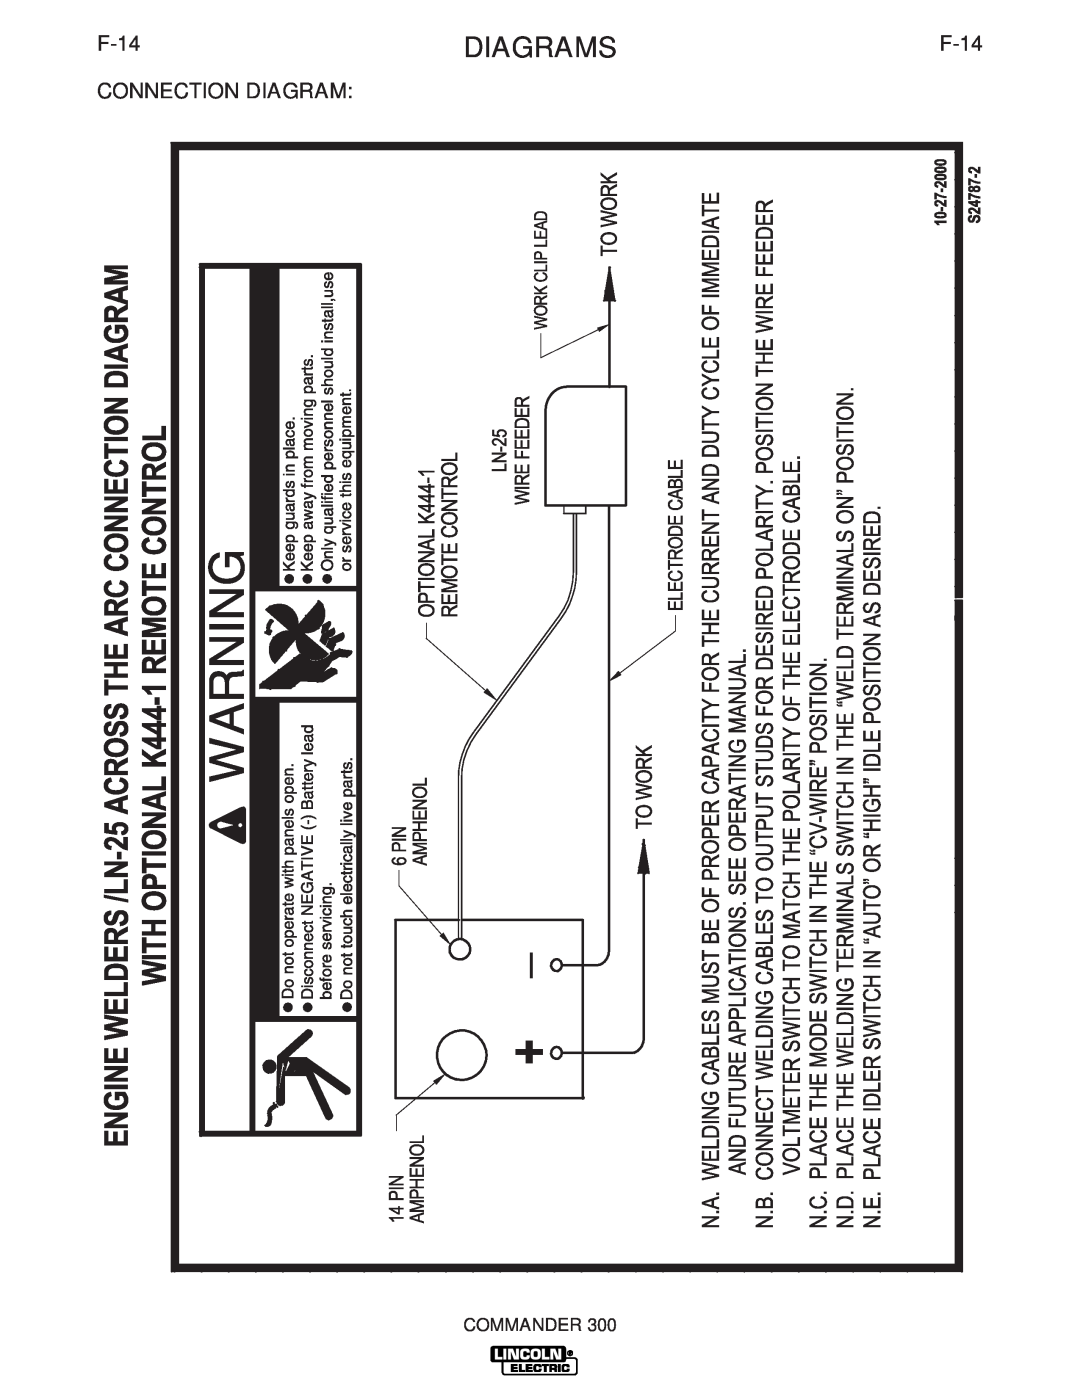 Lincoln Electric IM700-D manual DIAGRAMSF-14, F-14 CONNECTION DIAGRAM, Commander 